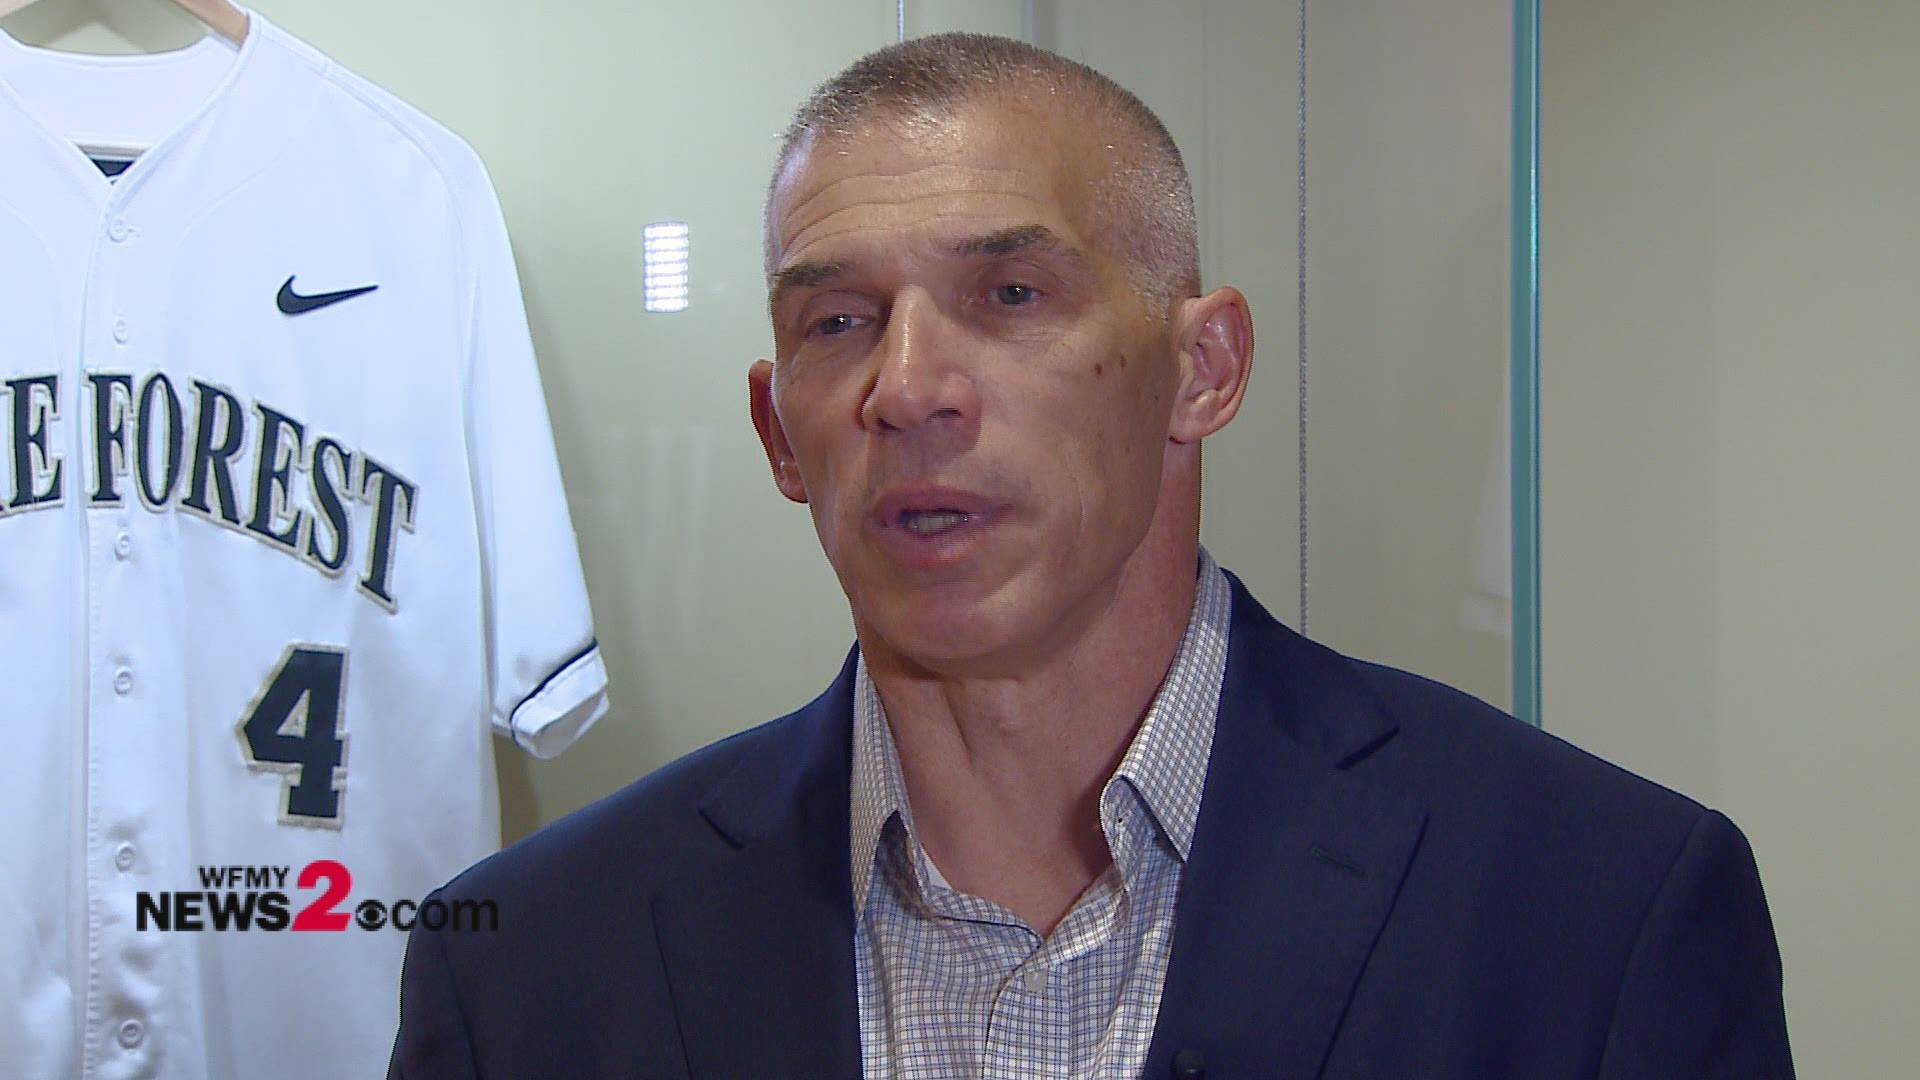 Girardi was in Winston-Salem speaking at Wake Forest Baseball's First Pitch Dinner